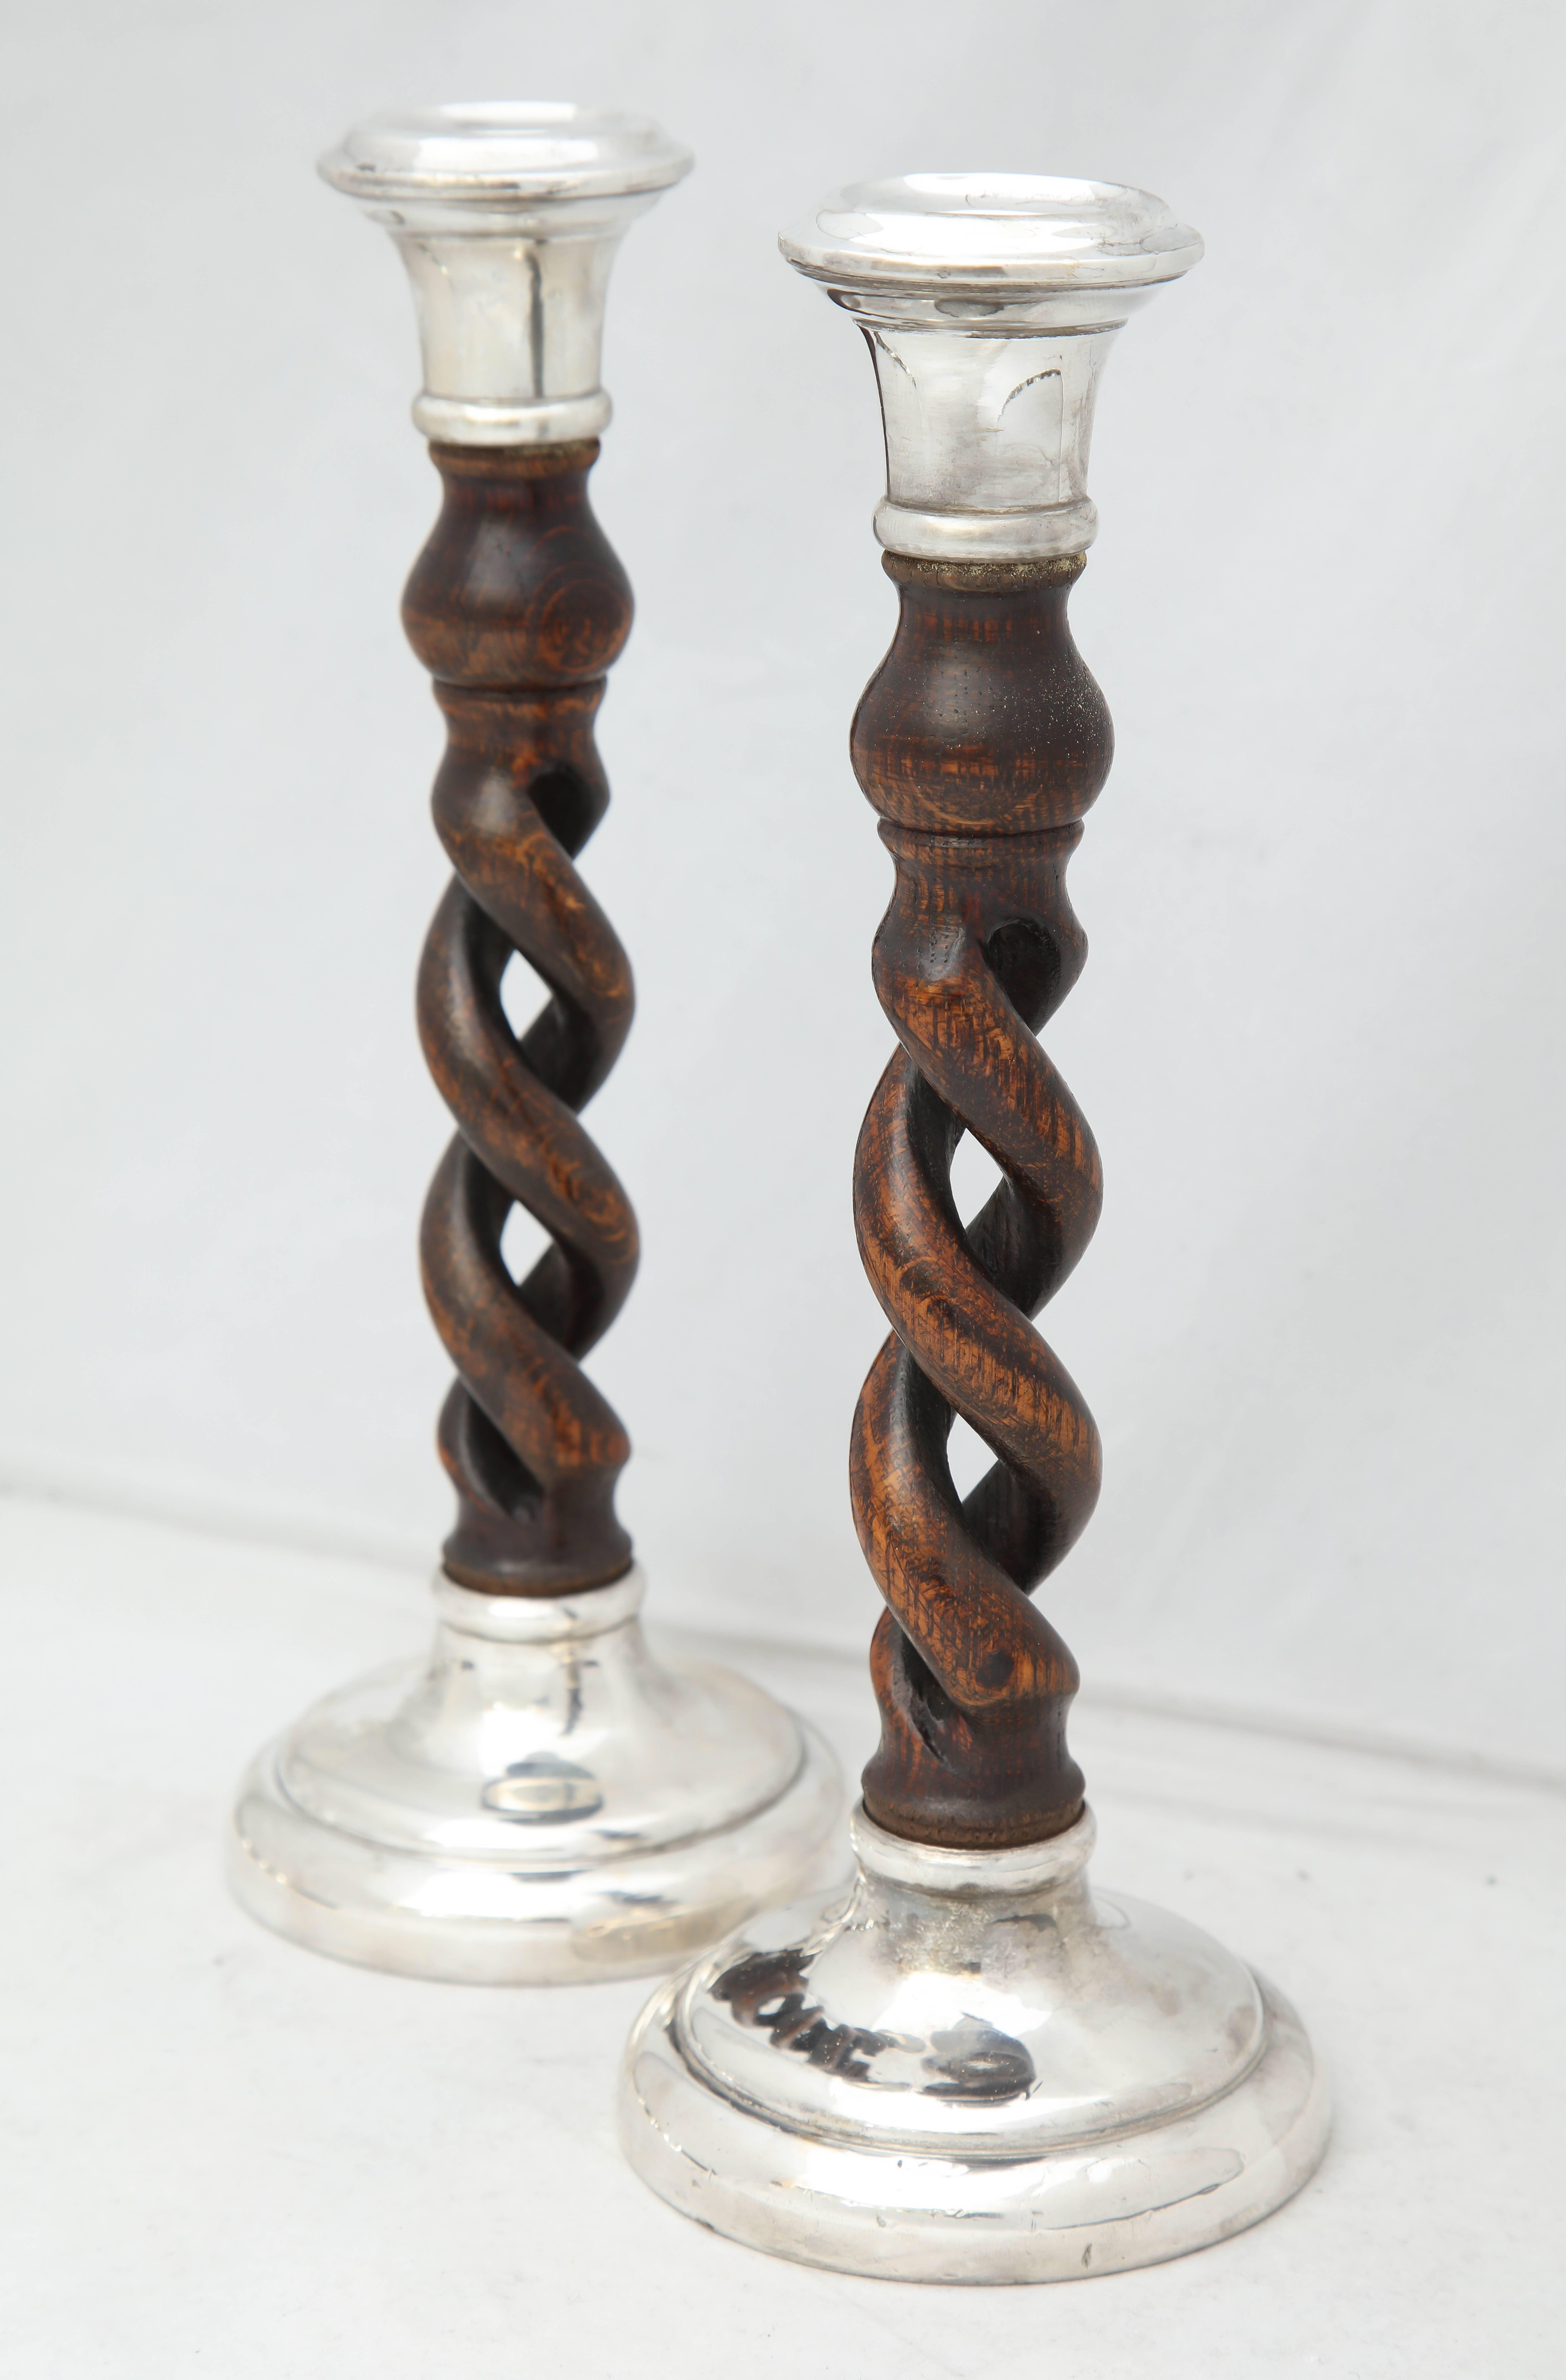 Pair of Arts & Crafts Sterling Silver-Mounted Barley Twist Wood Candlesticks 1